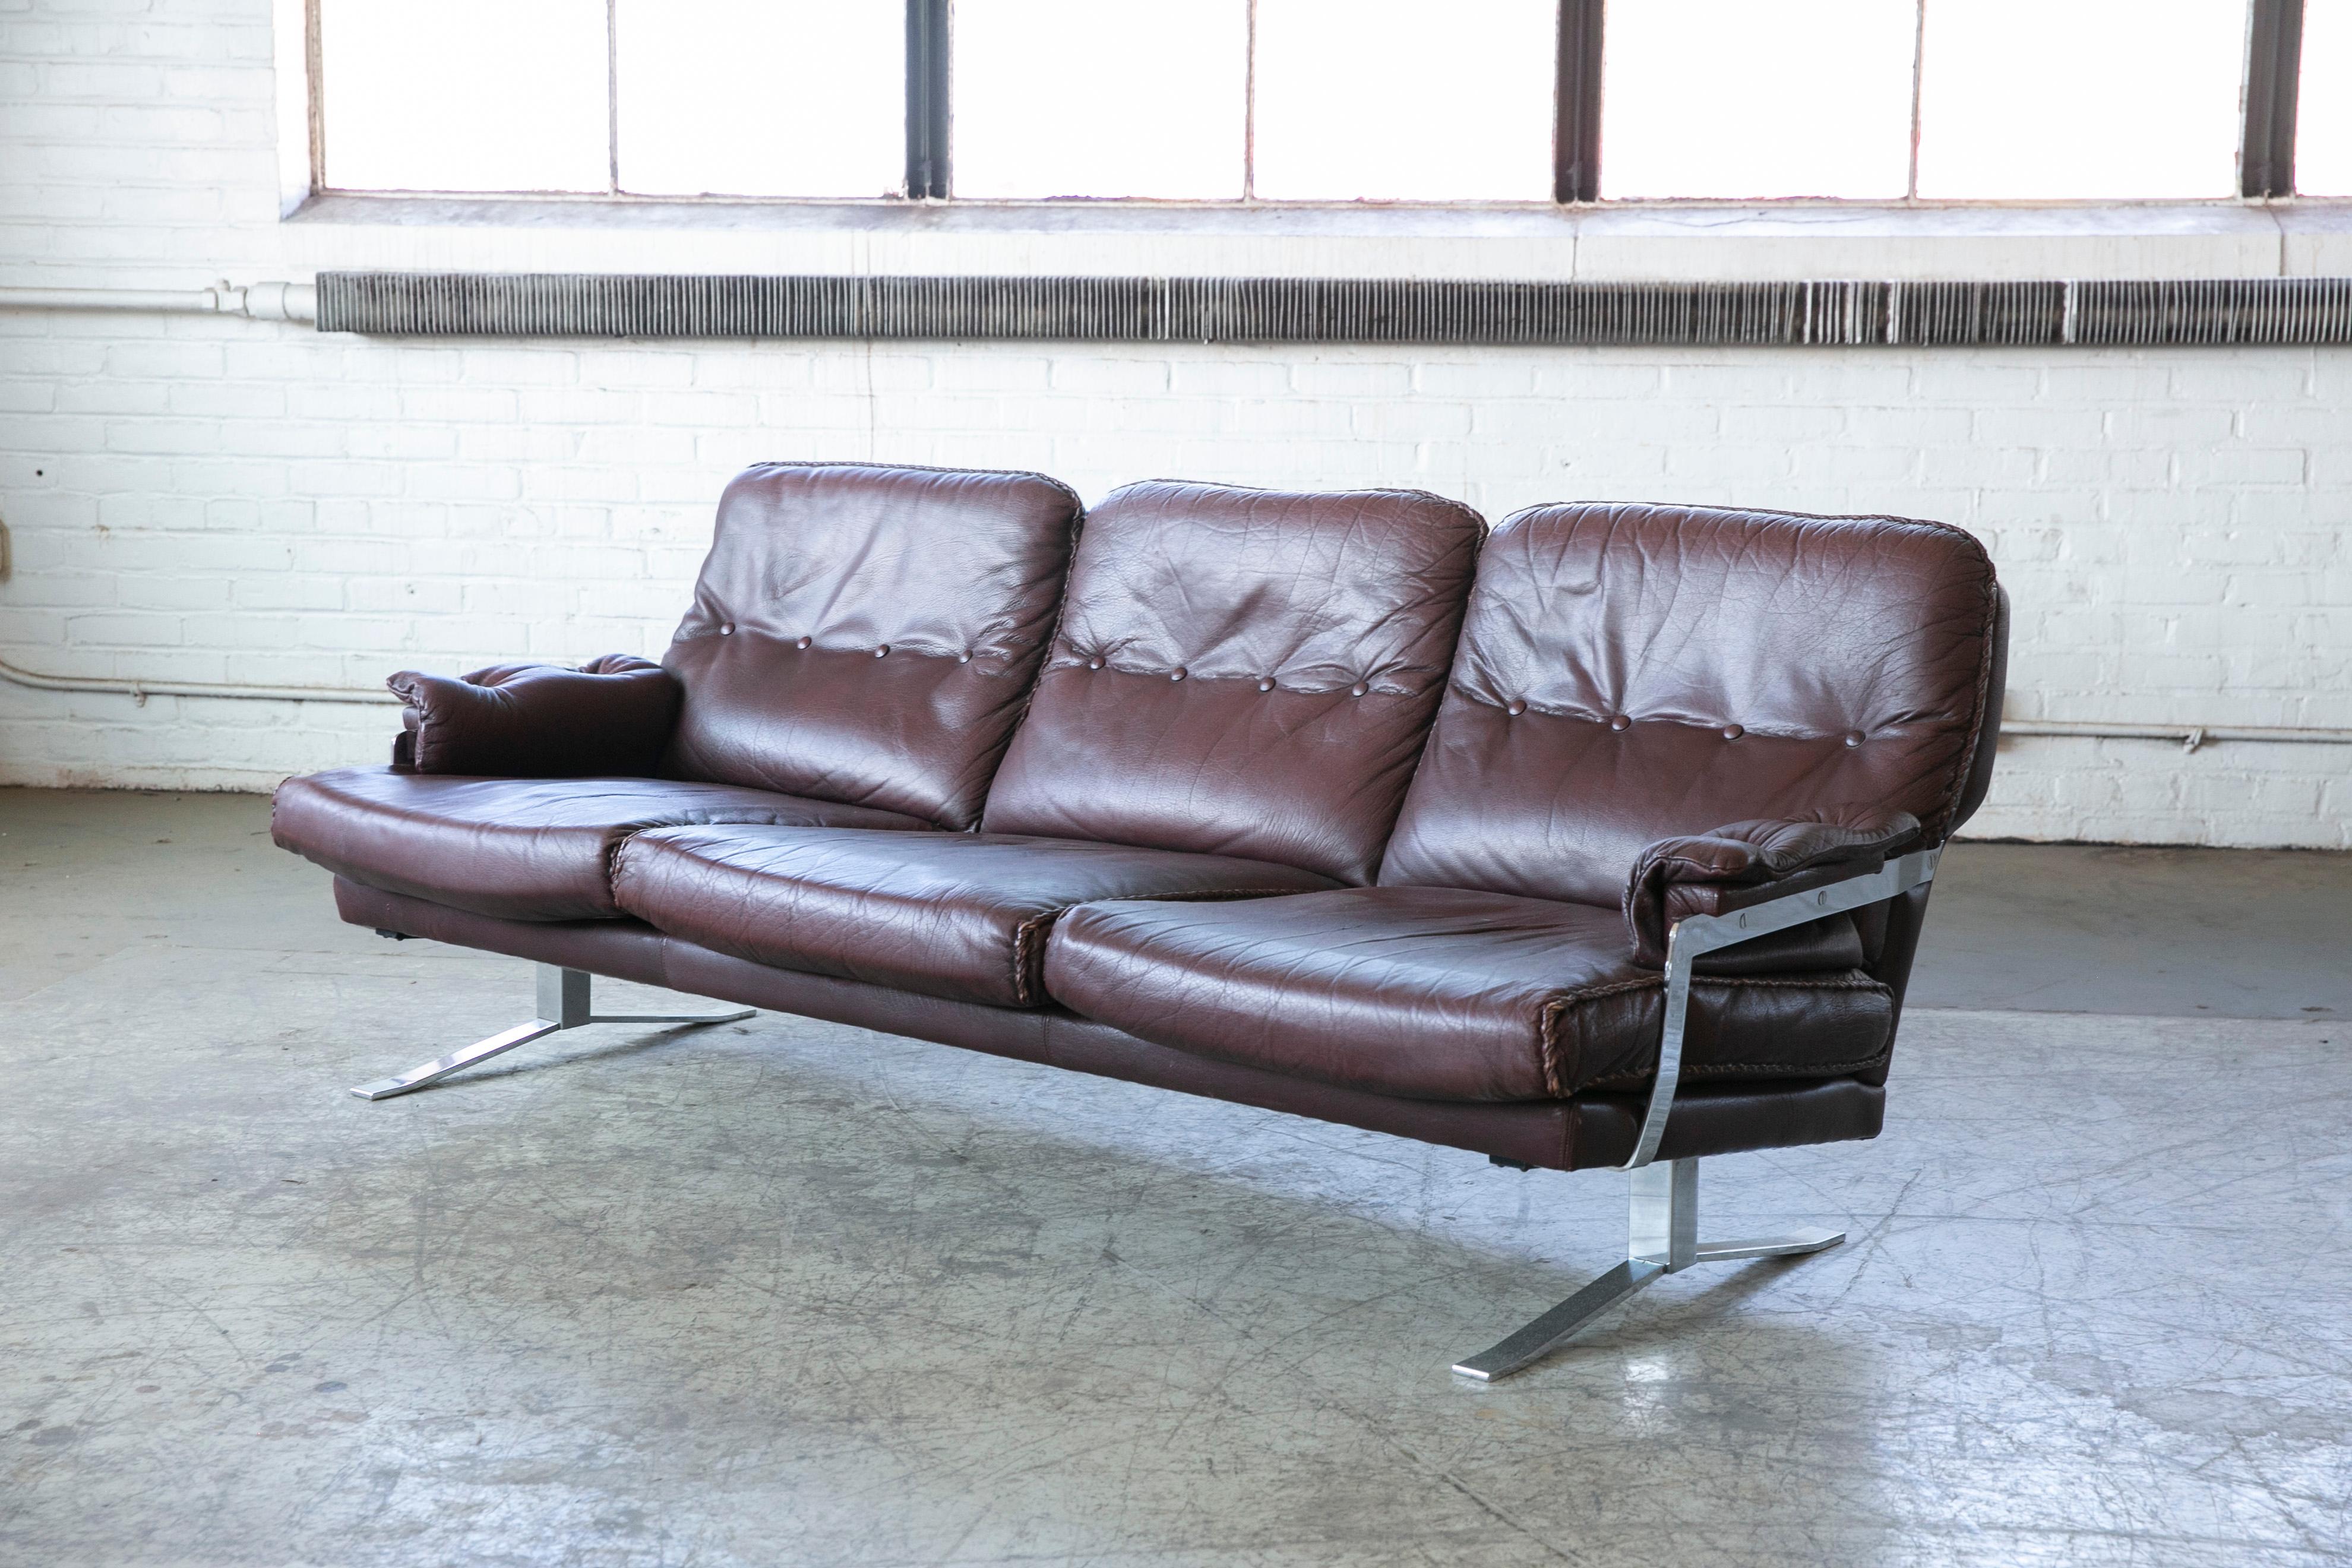 A sofa in chocolate brown buffalo leather and chrome base with fabulous whipstitch trim, designed by Arne Norell for Vatne Møbler of Norway and produced in the late 1960's or early 1970's. Very cool design. Buffalo hide wears and ages very well and